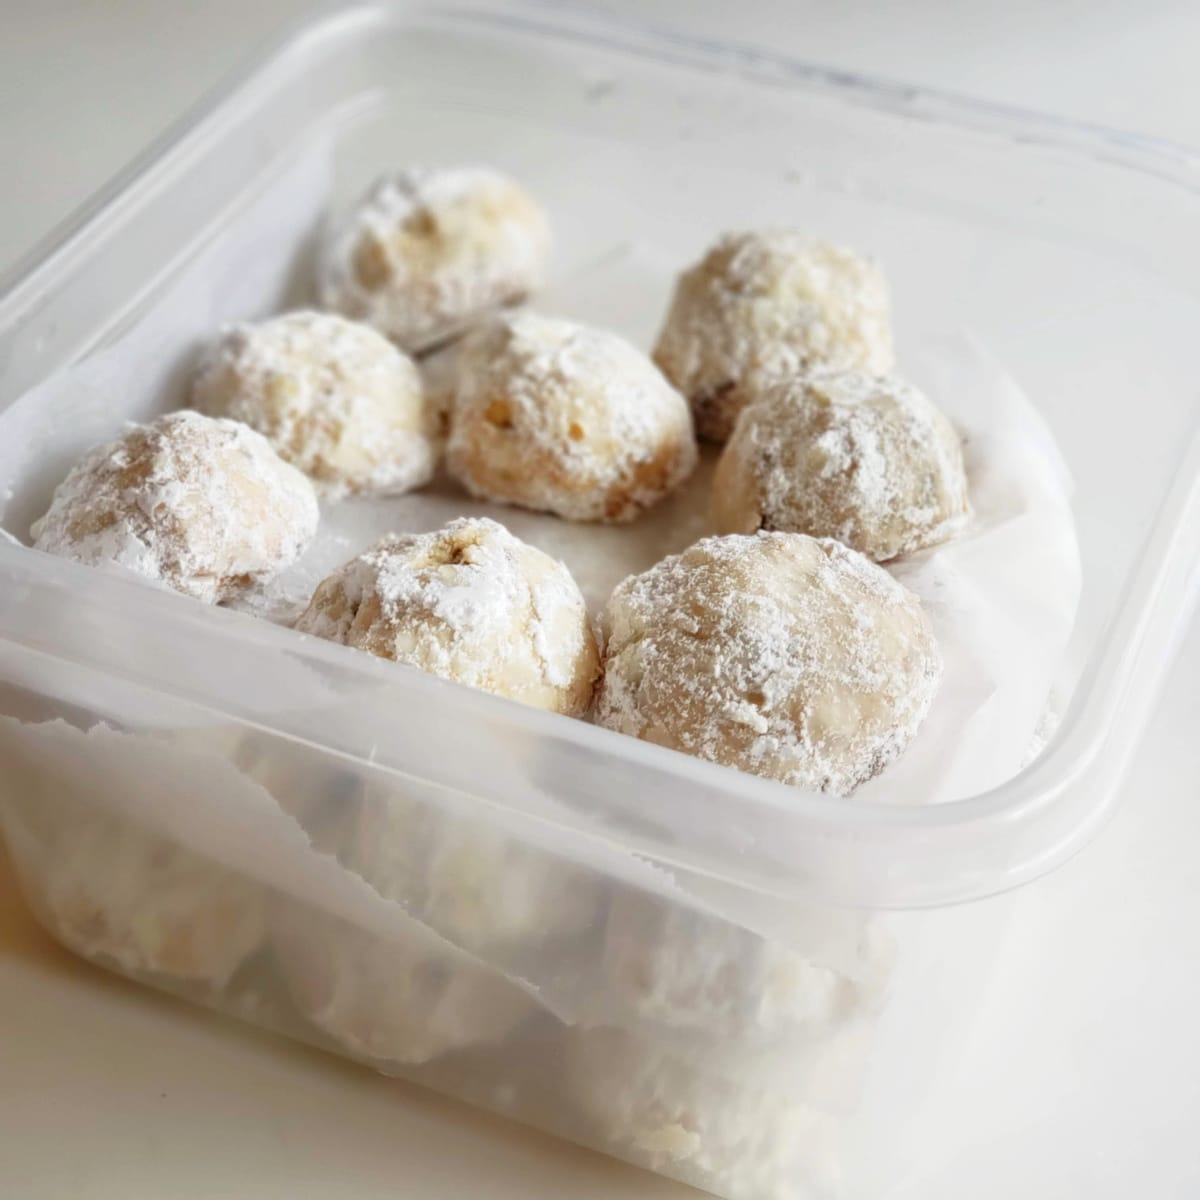 Mexican Wedding Cookies packed into a square plastic storage container on ShockinglyDelicious.com